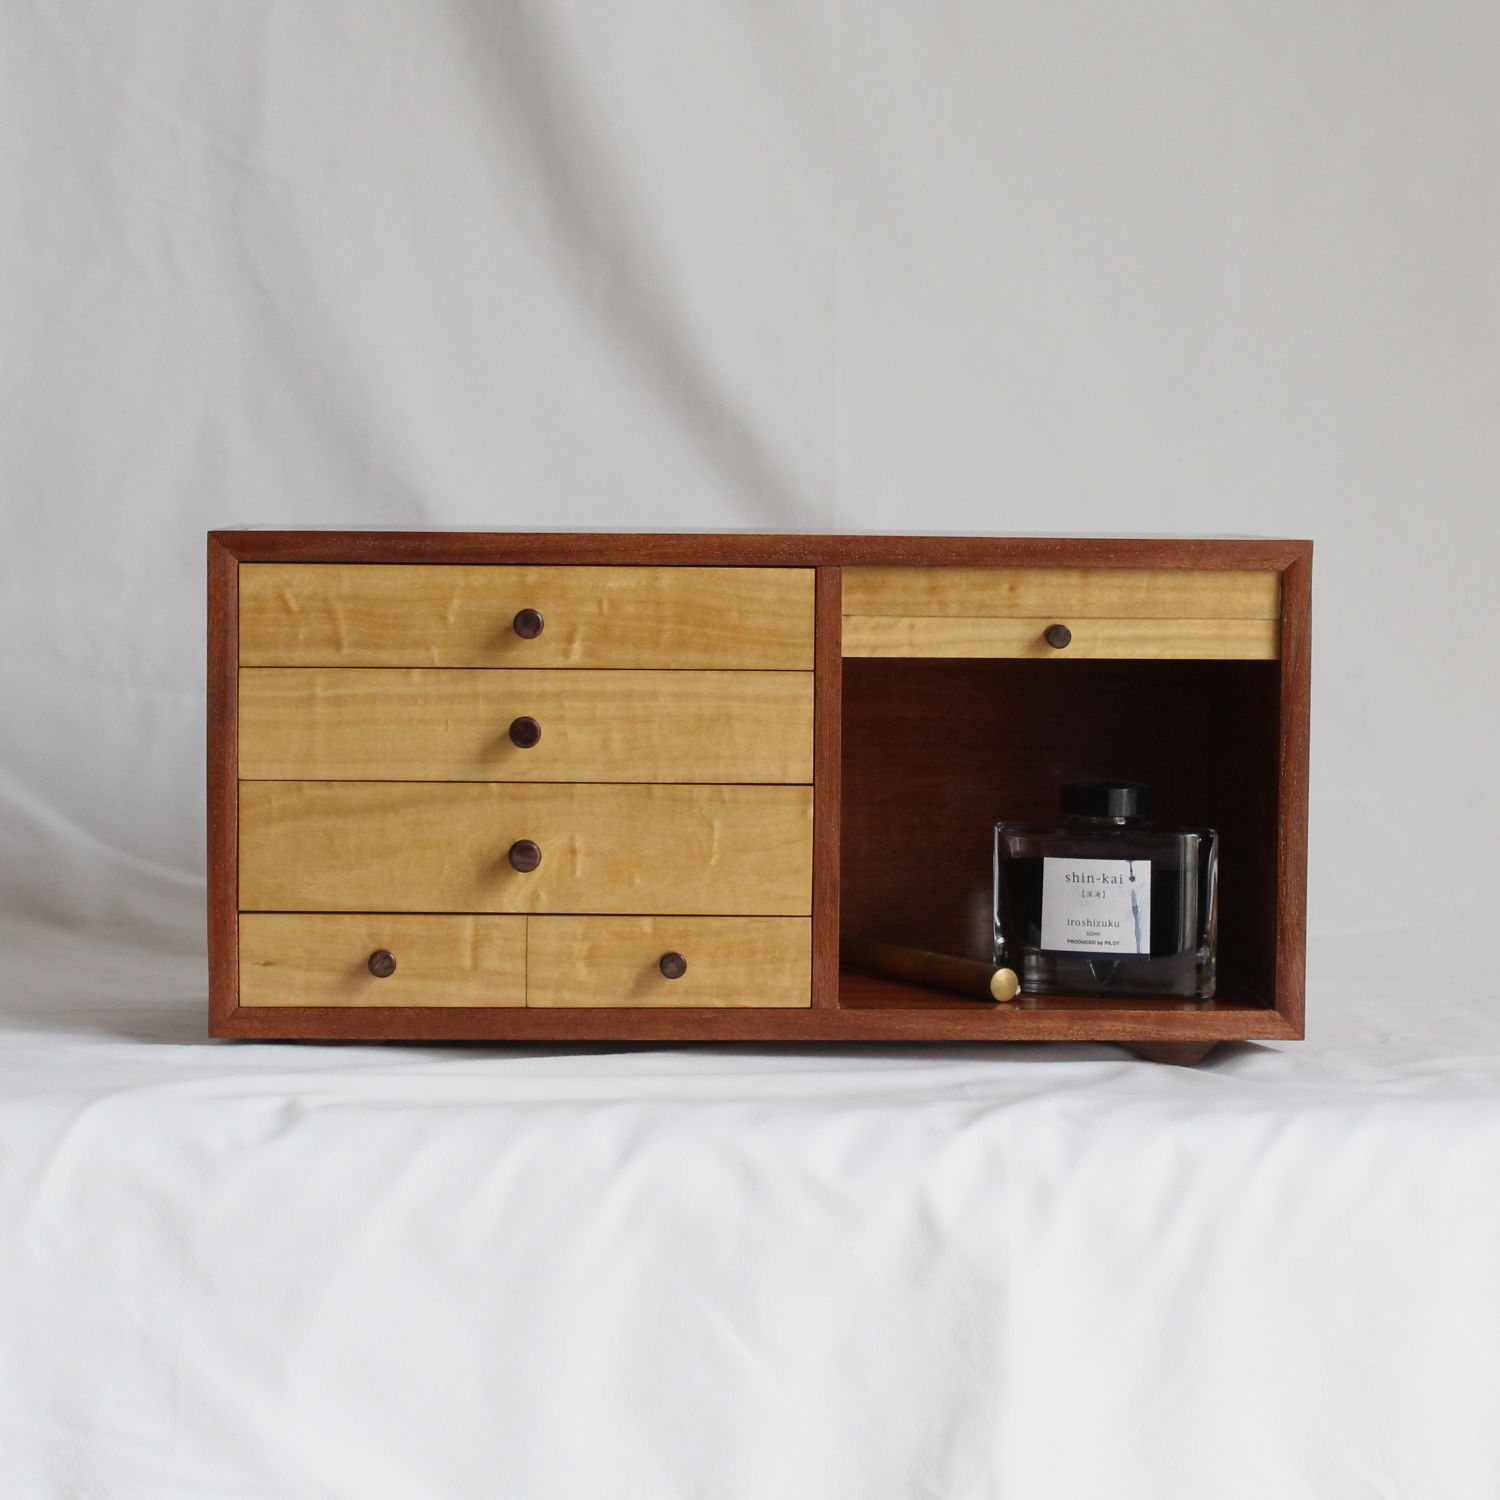 Small Chest of Drawers with a bottle of pen ink